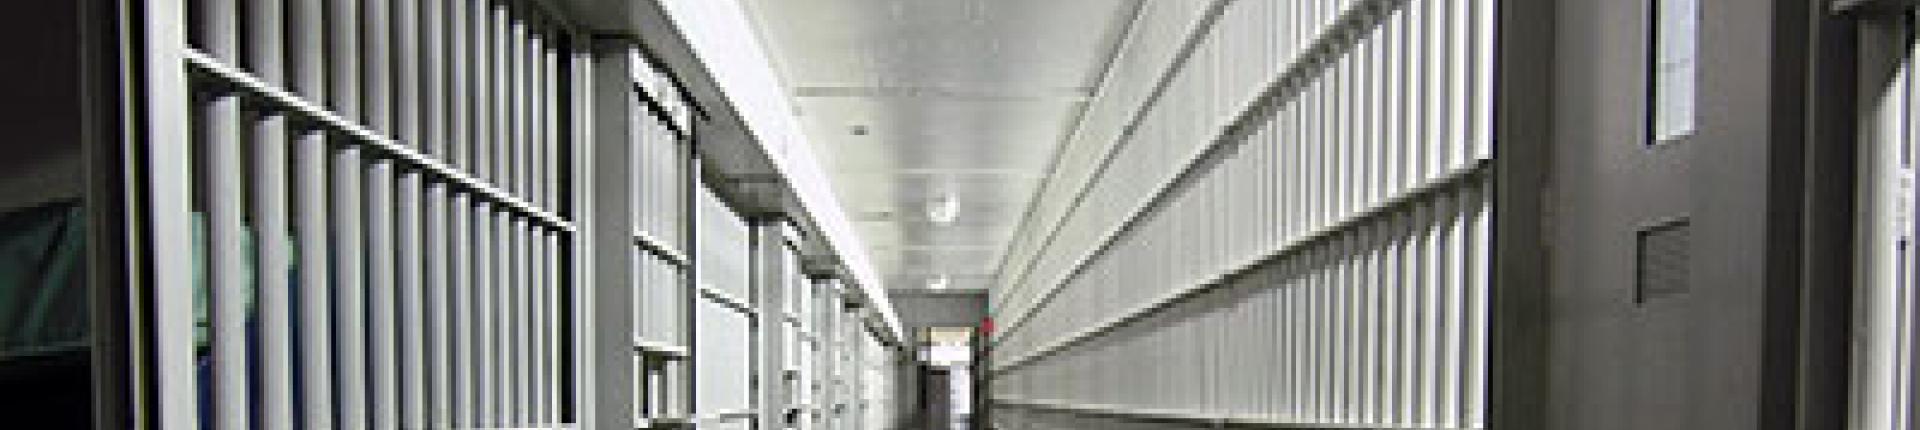 Image of NYC jail cell